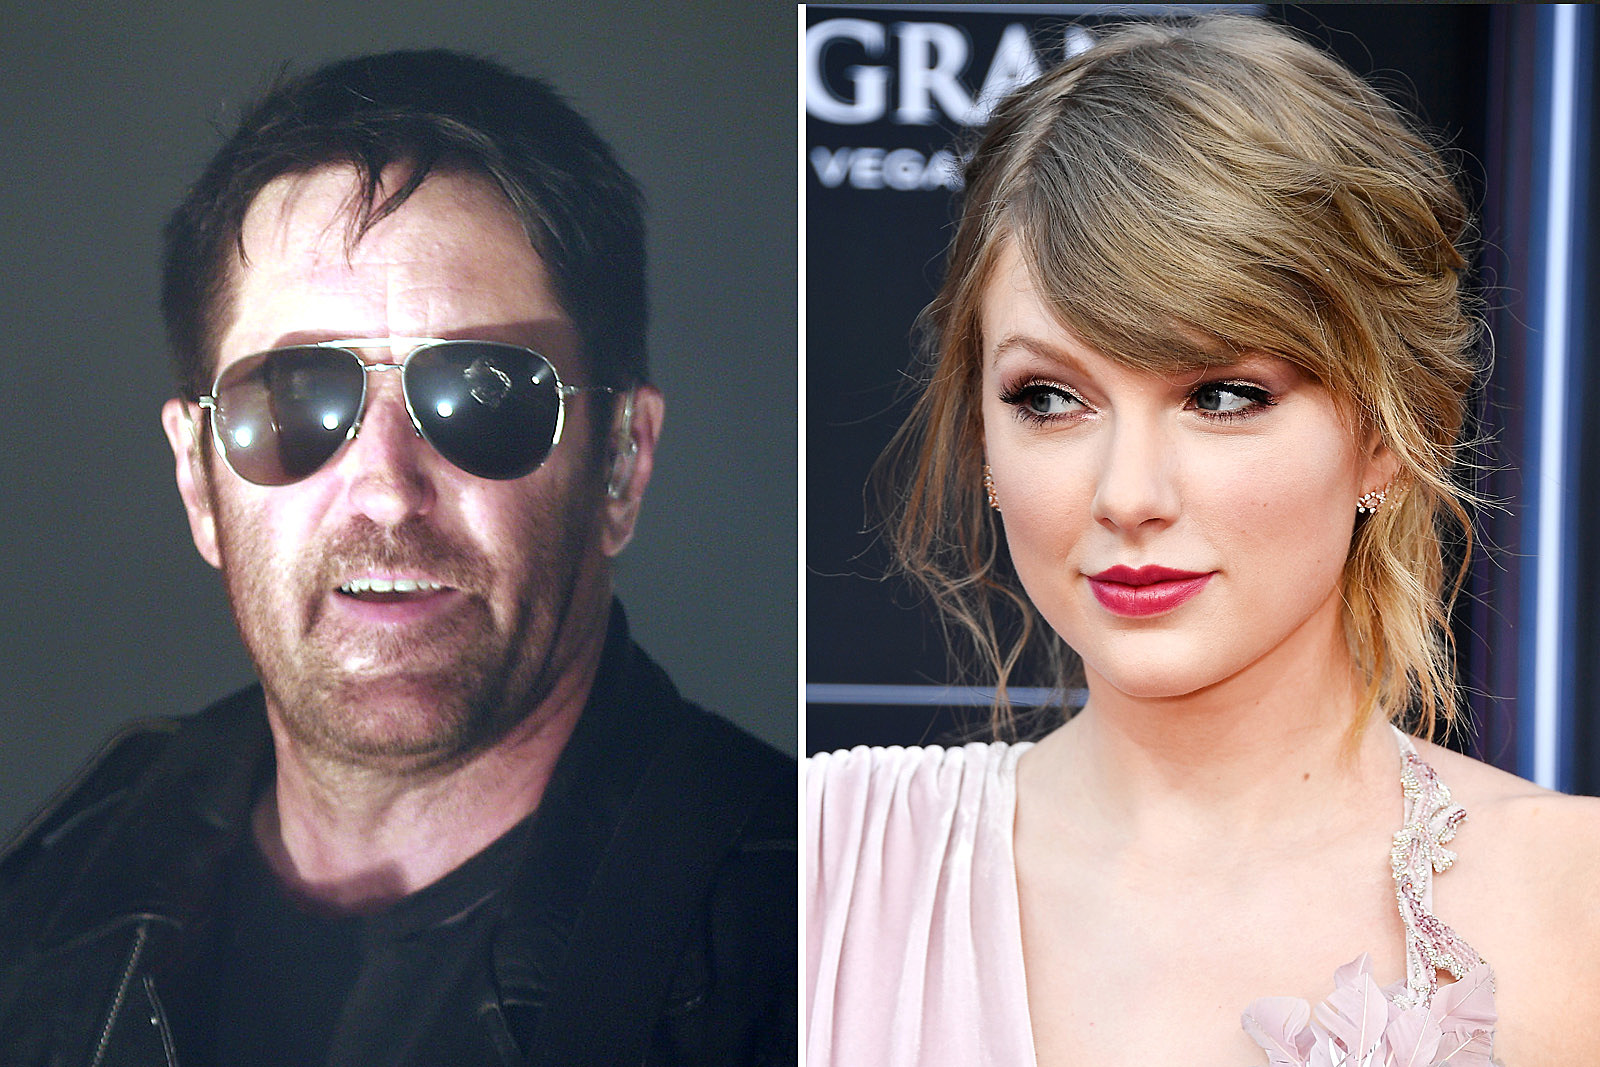 Taylor Swift Hot Porn Blowjob - Trent Reznor Slams 'Taylor Swifts' Who Keep Politics Out of Music